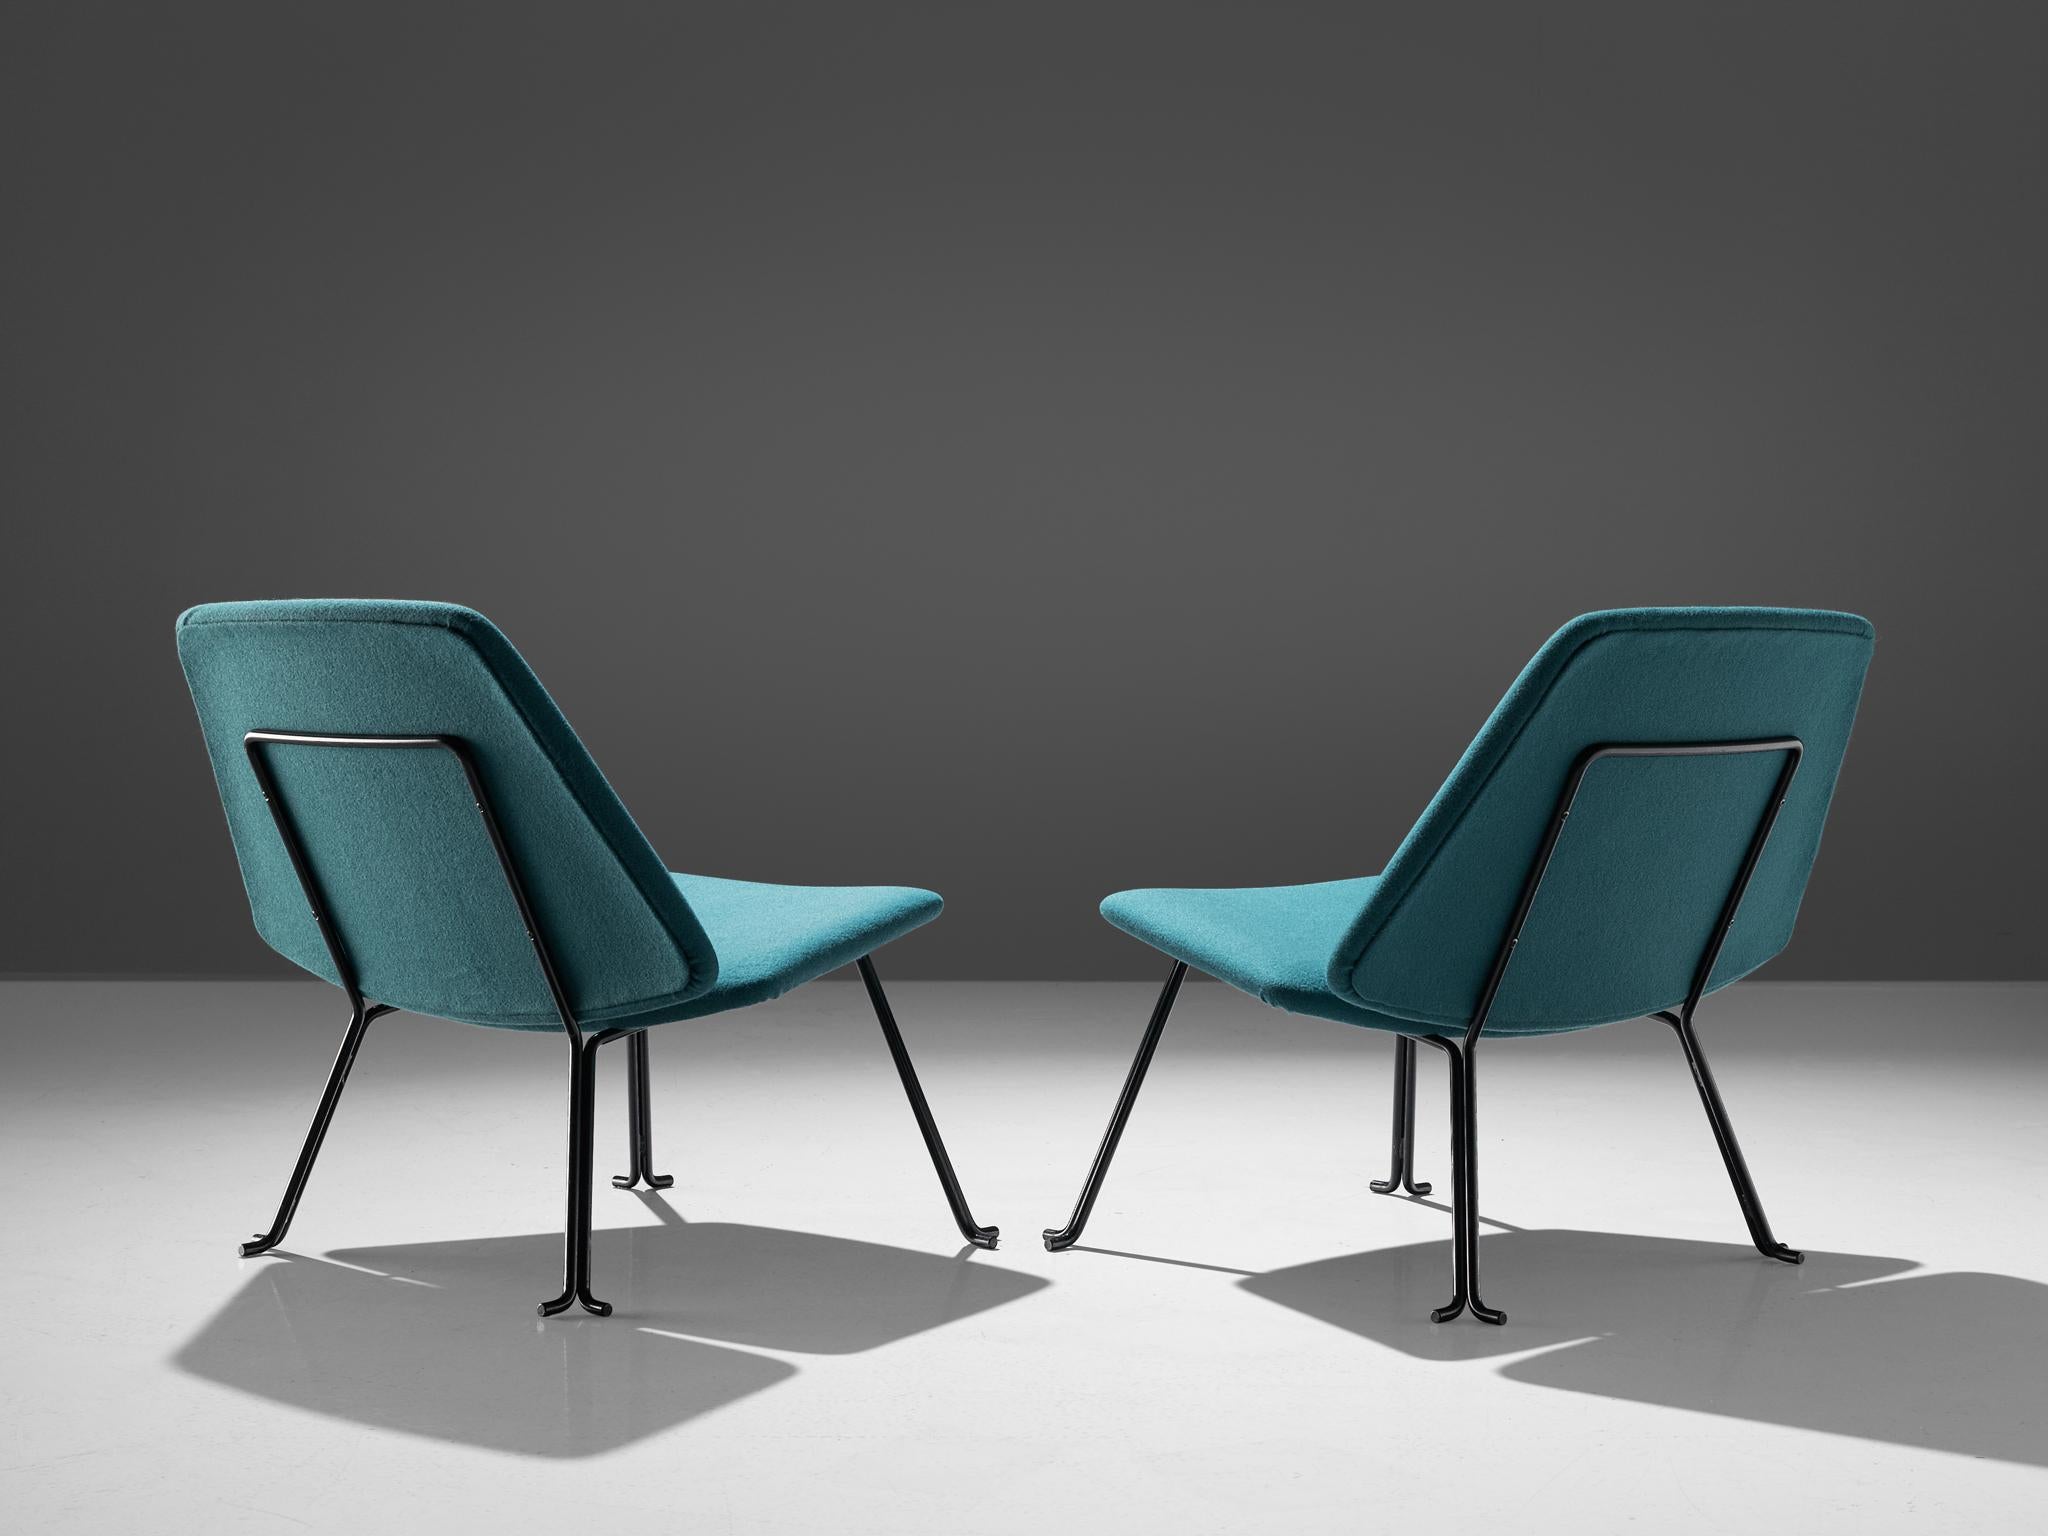 Pair of easy chairs, turquois fabric and black metal, Italy, circa 1950

The black coated solid iron frame combines the separated seat and back together and then get's connected with all the legs as well. It features a bright green fabric